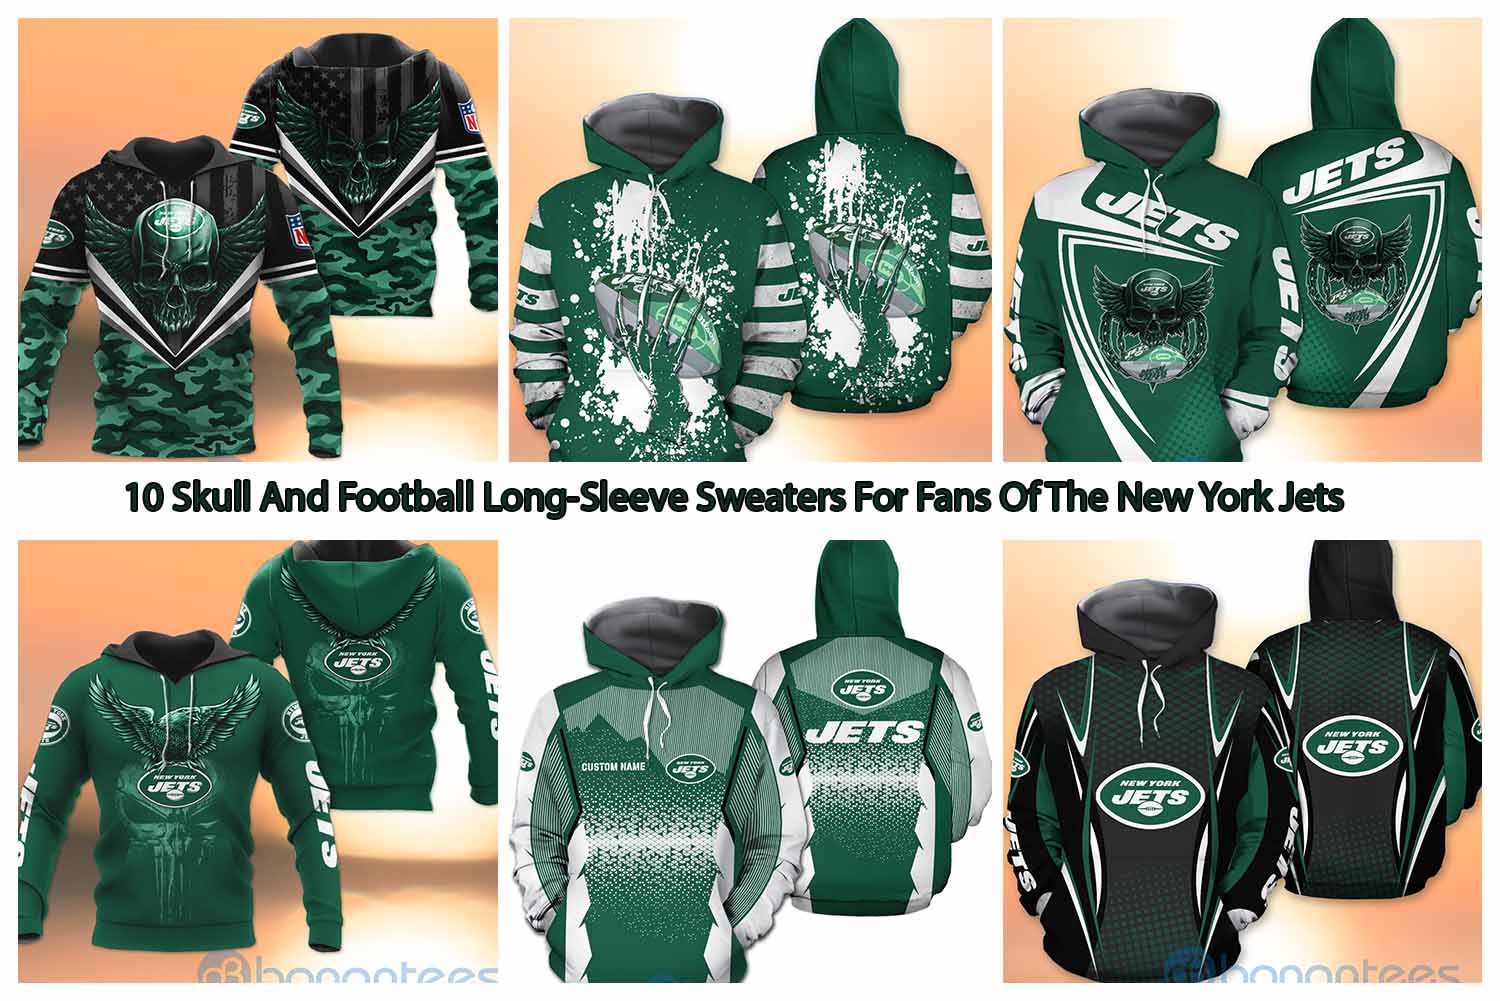 10 Skull And Football Long-Sleeve Sweaters For Fans Of The New York Jets